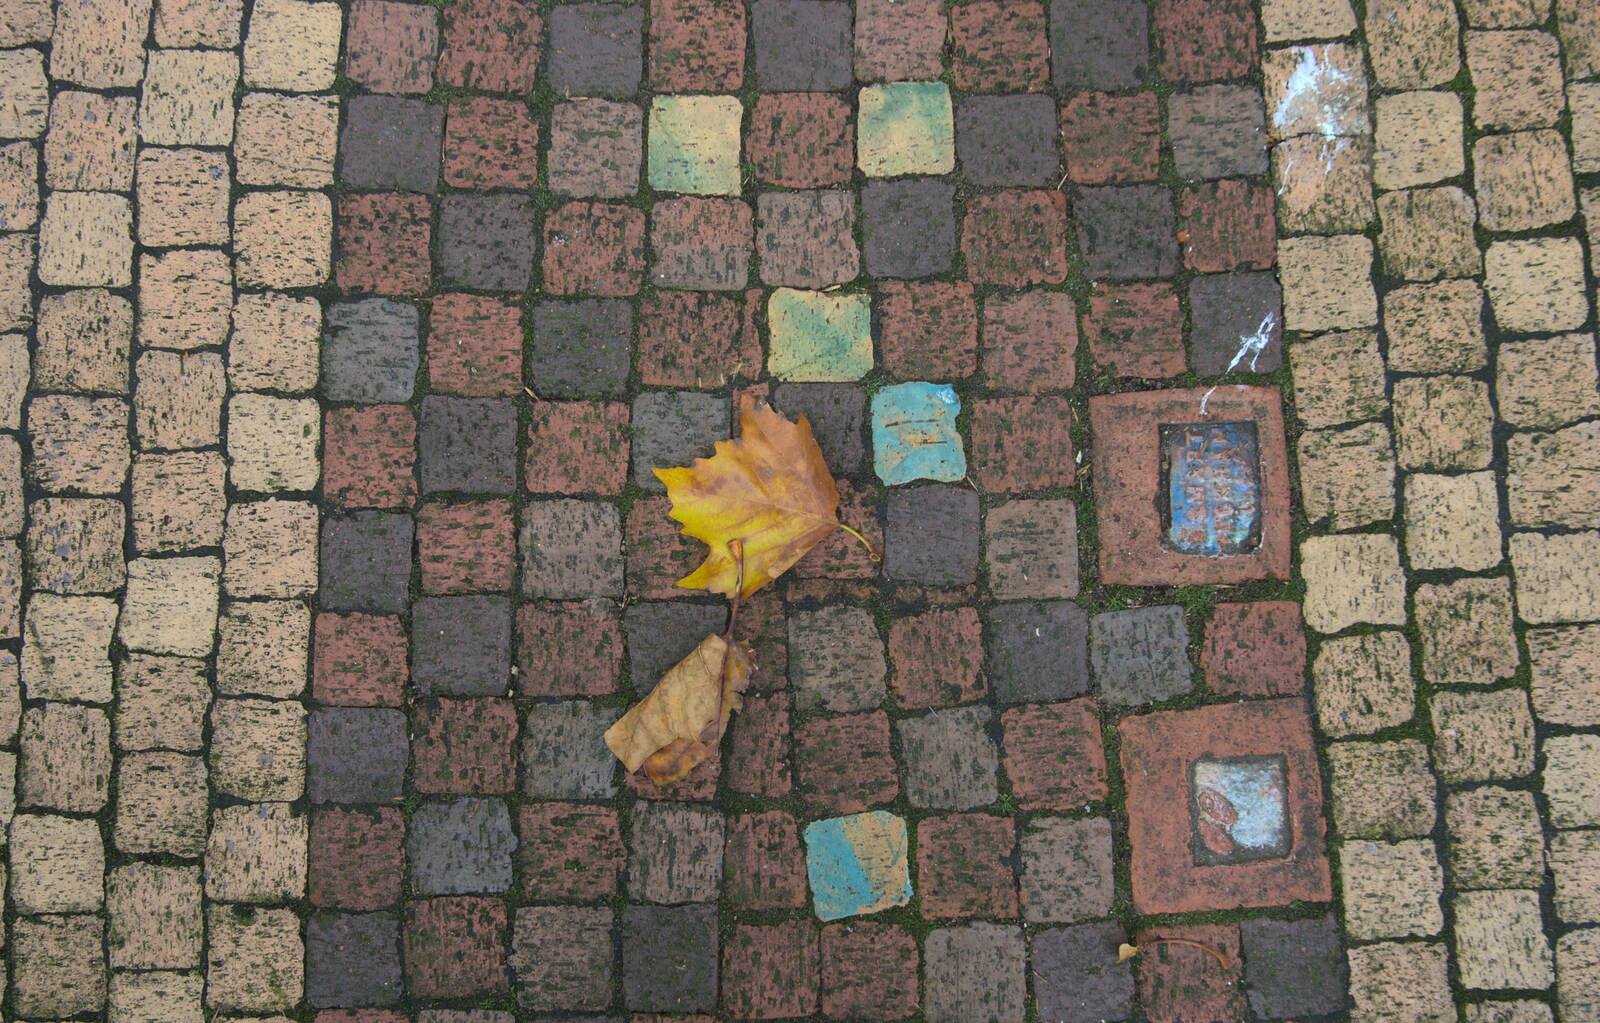 Tiles and leaves outside Petitou from Another Trip to Peckham, Southwark, London - 28th October 2012